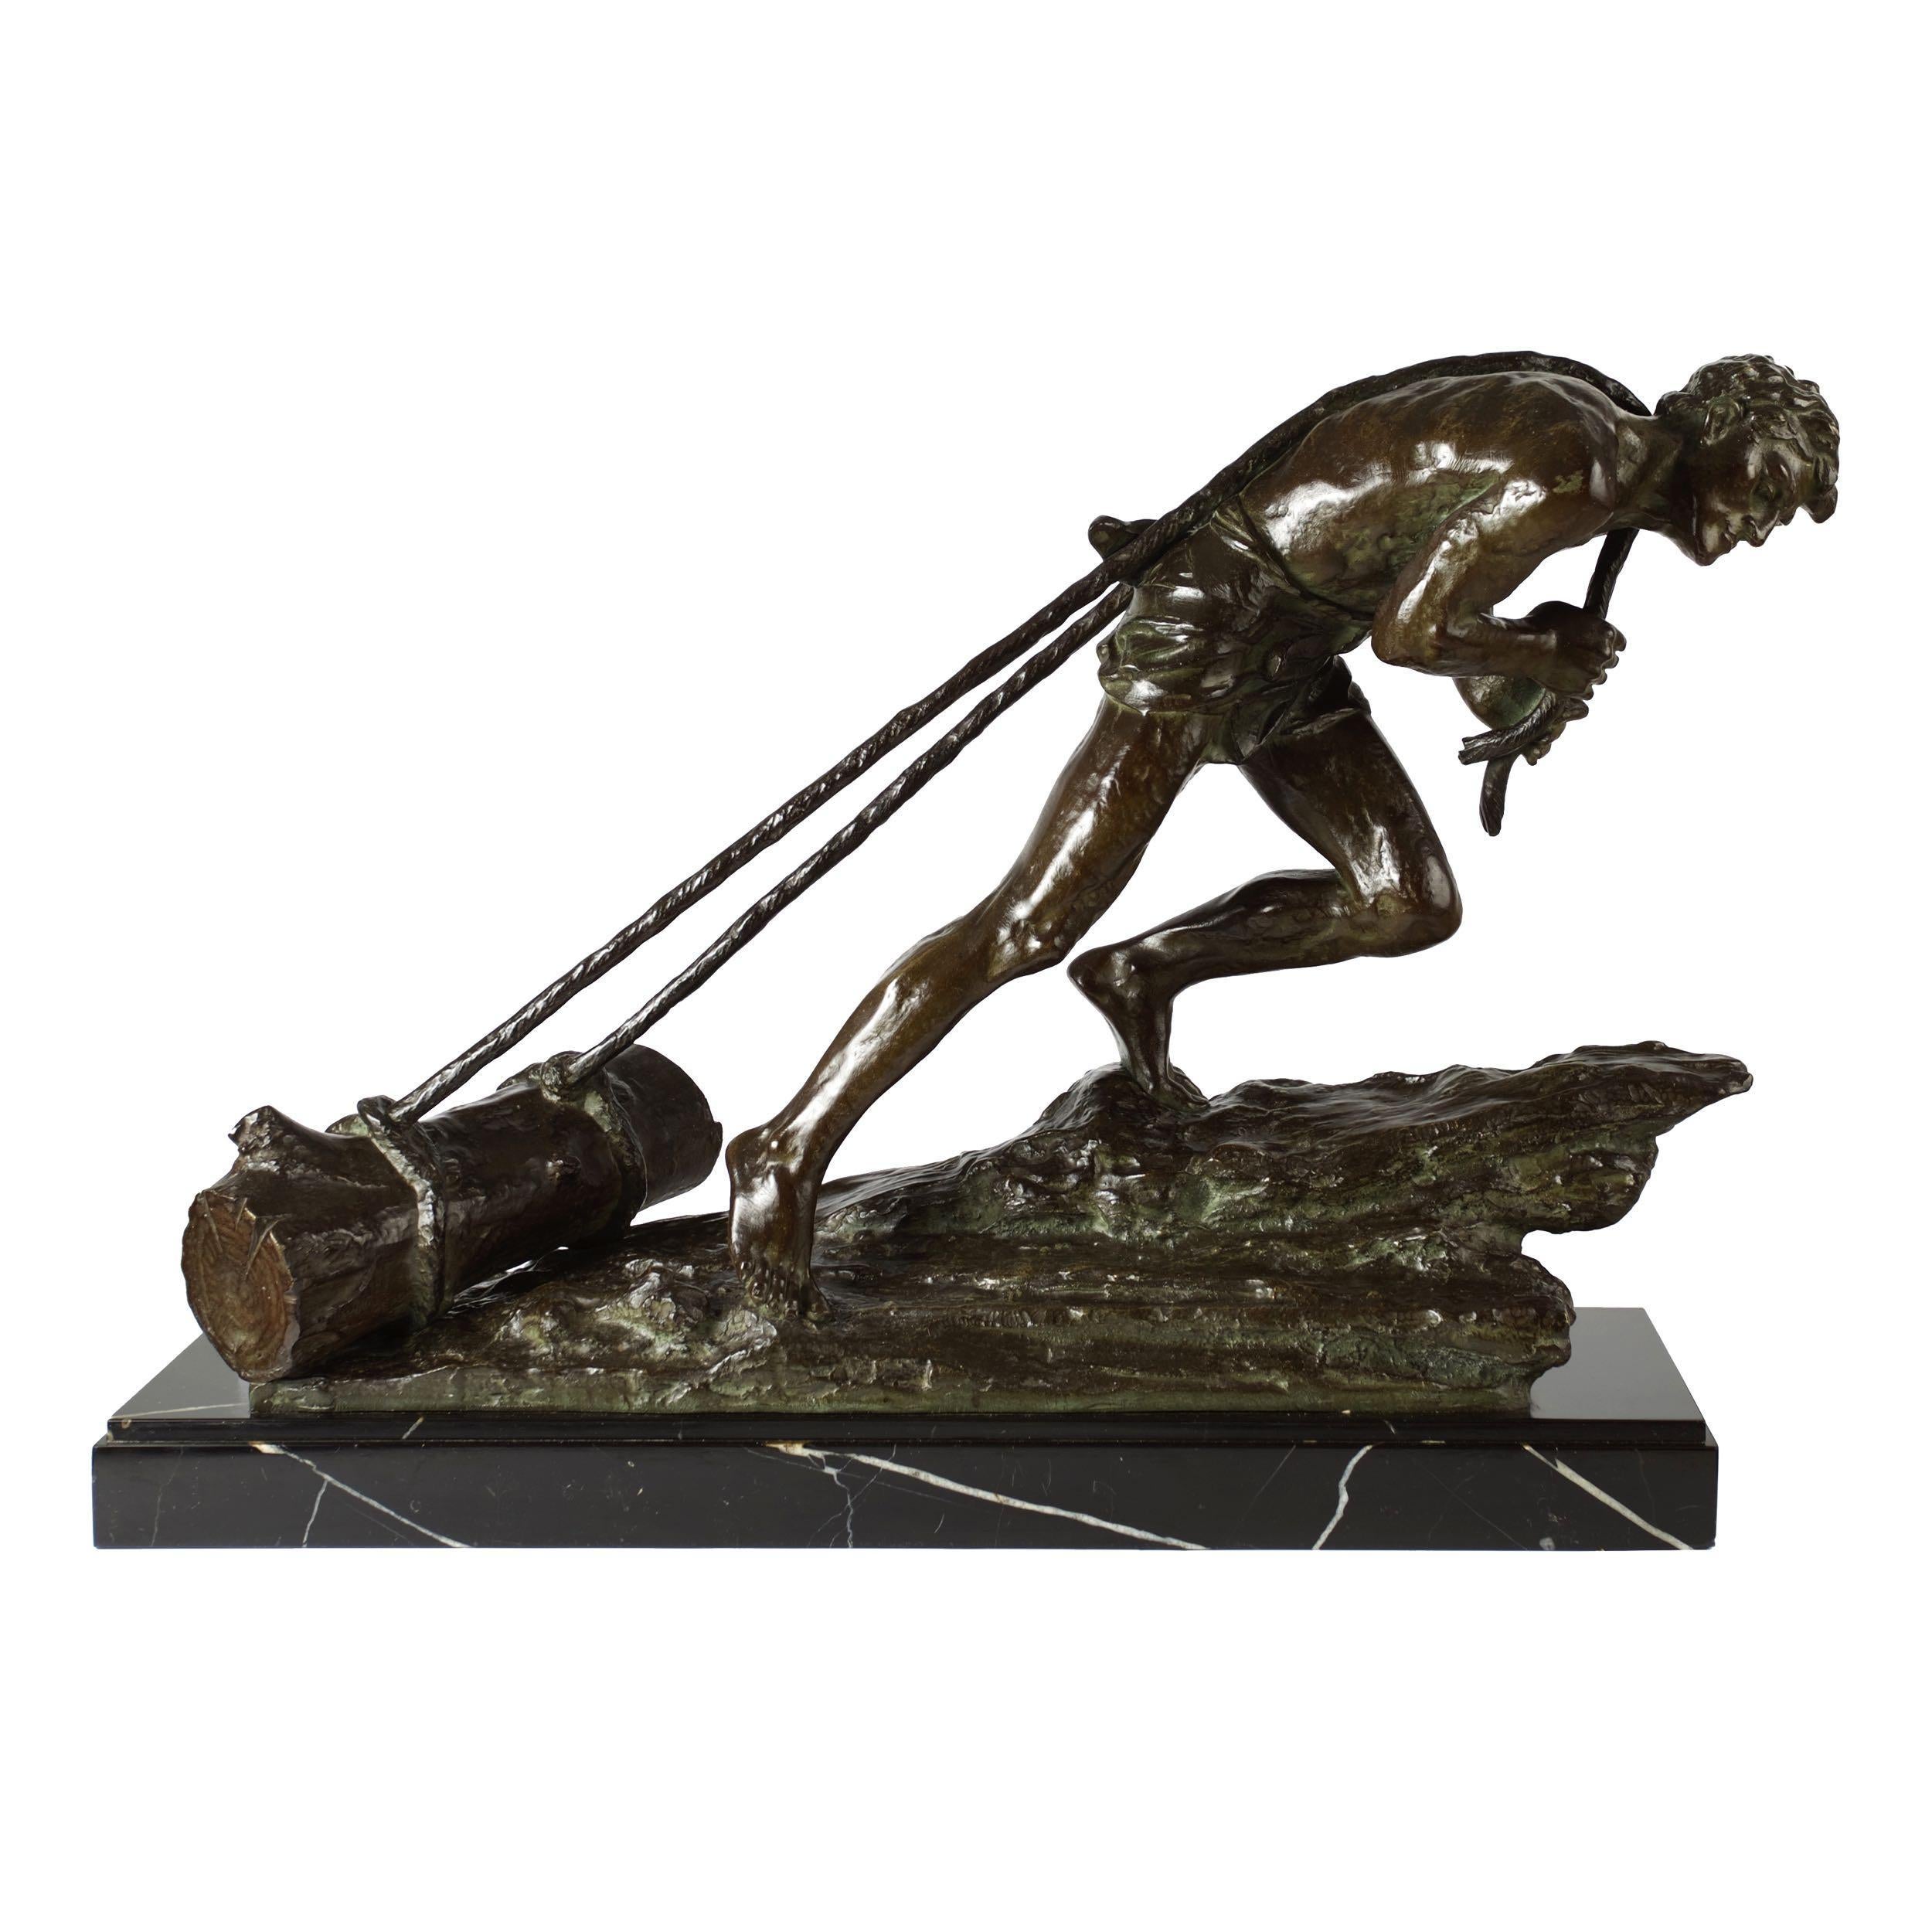 An incredibly powerful model from Edouard Drouot's collection of labor studies, it captures a lone figure dragging logs through the mire with two ropes stretched taught over his back. Only a slight garment protects him from the elements as he